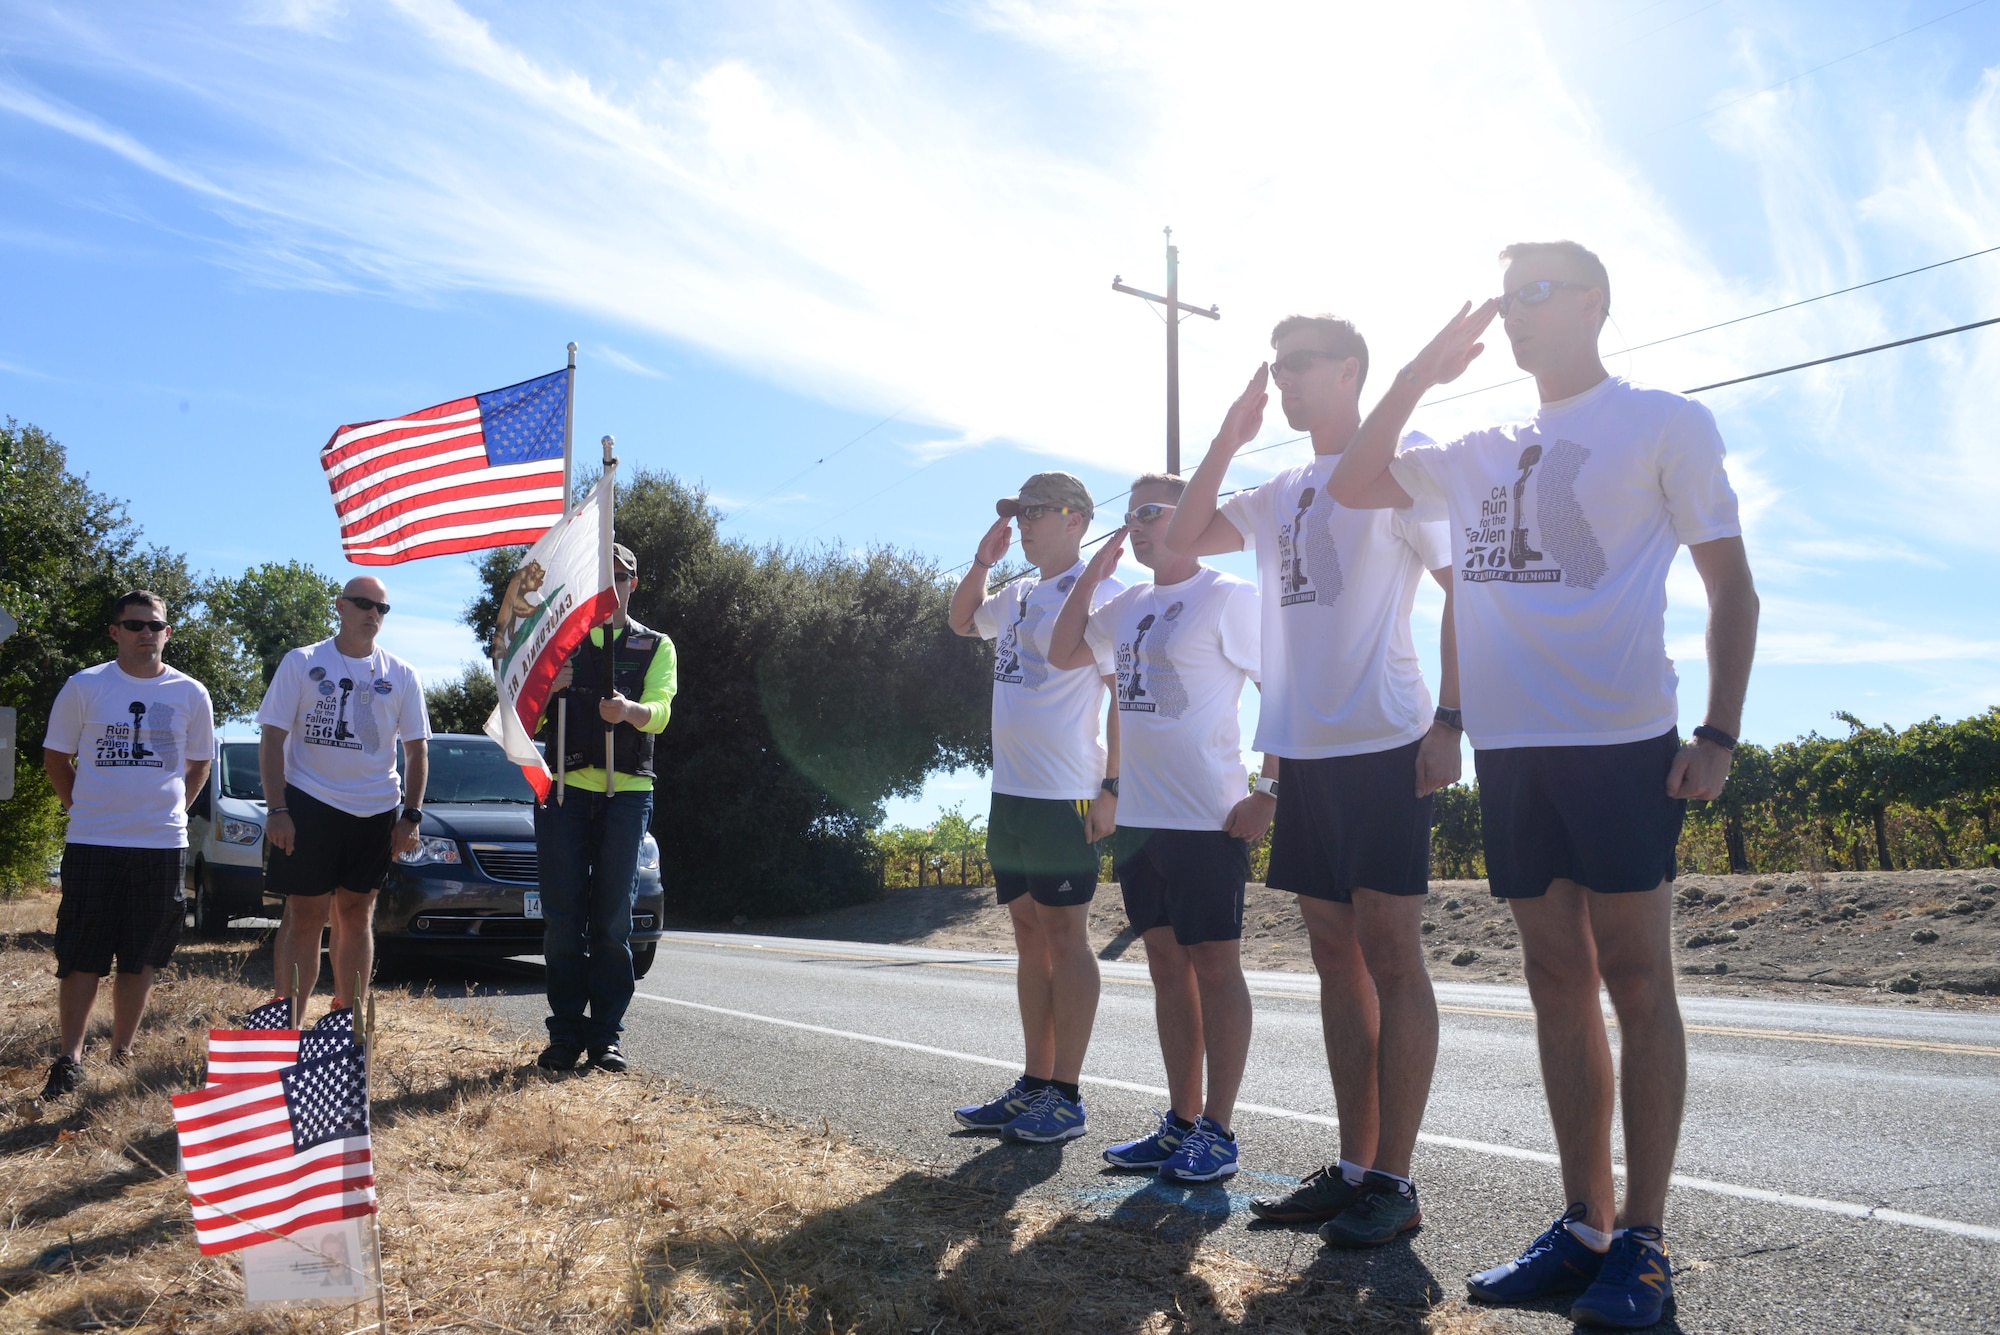 Airmen from the 60th Air Mobility Wing at Travis Air Force Base participate in the California Run for the Fallen on Sept. 23, 2016.  The run raises awareness for California service members who have been killed in action after Sept. 11, 2001, rejuvenating their memories and keeping their spirits alive. (U.S. Air Force photo by 2nd Lt Geneva Croxton)